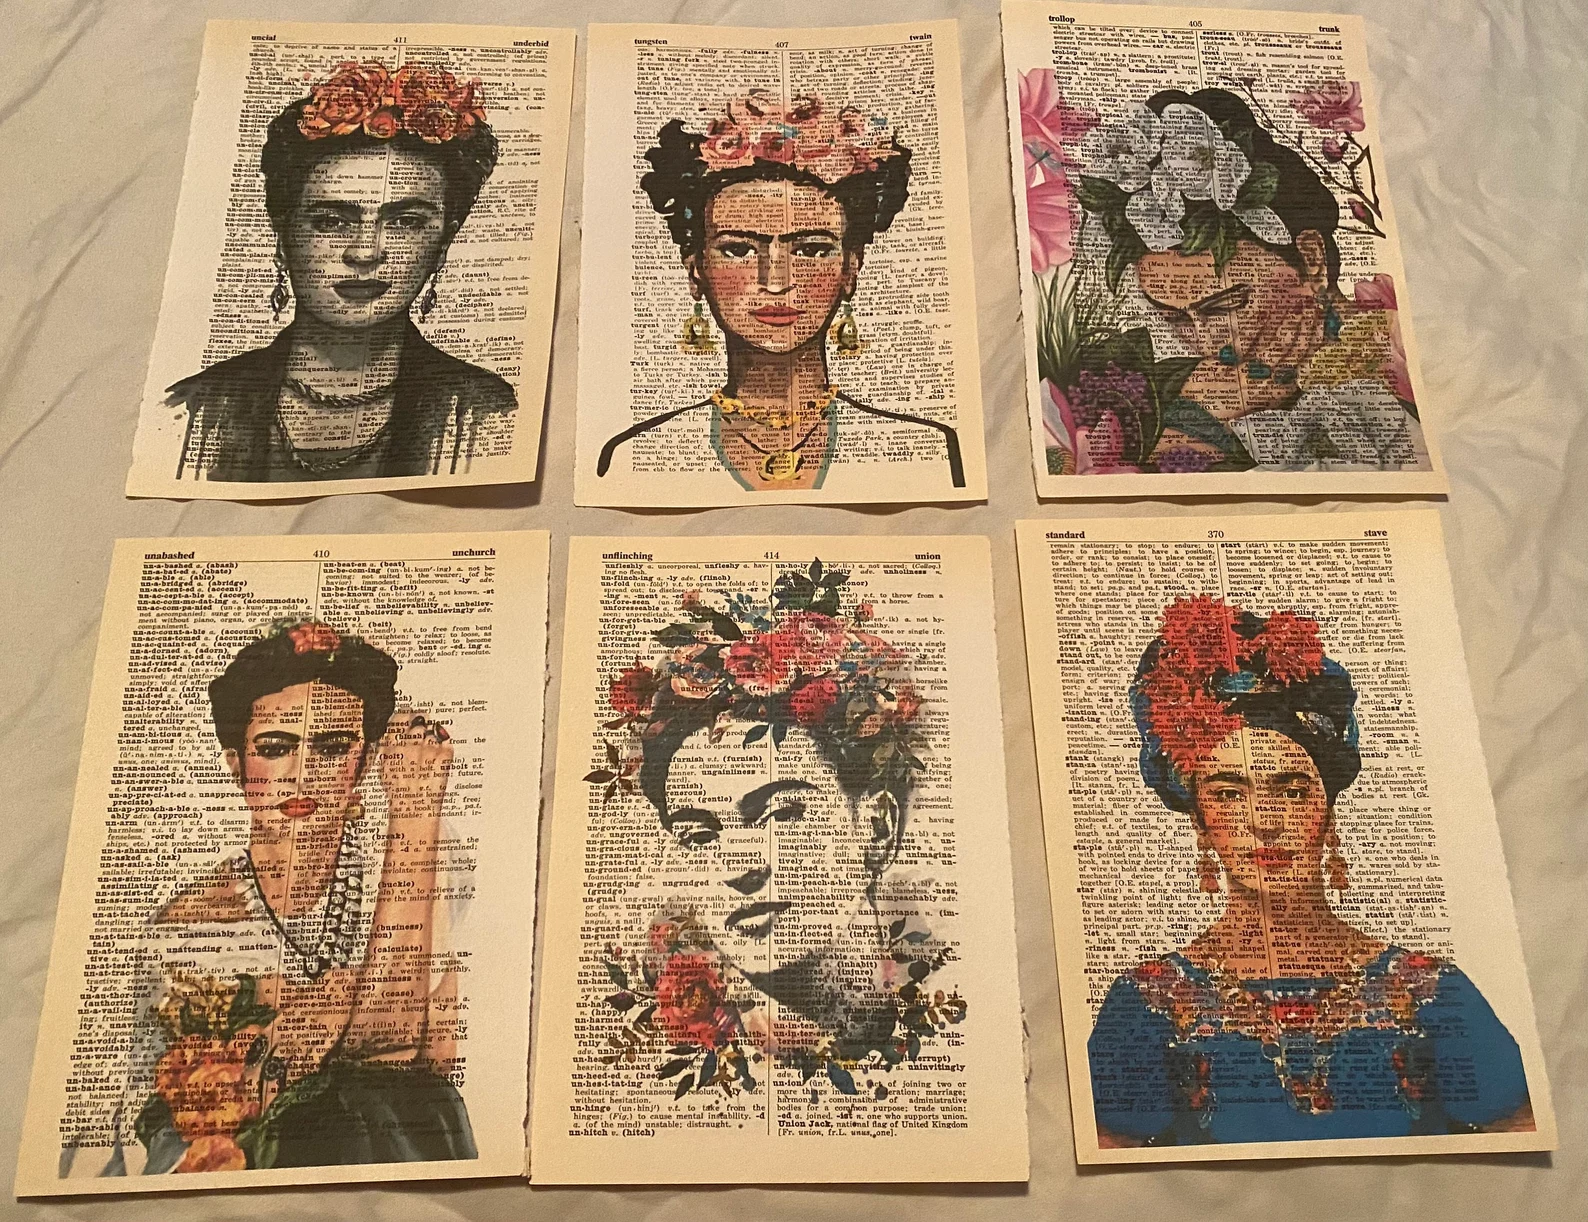 Frida Kahlo prints on dictionary paper